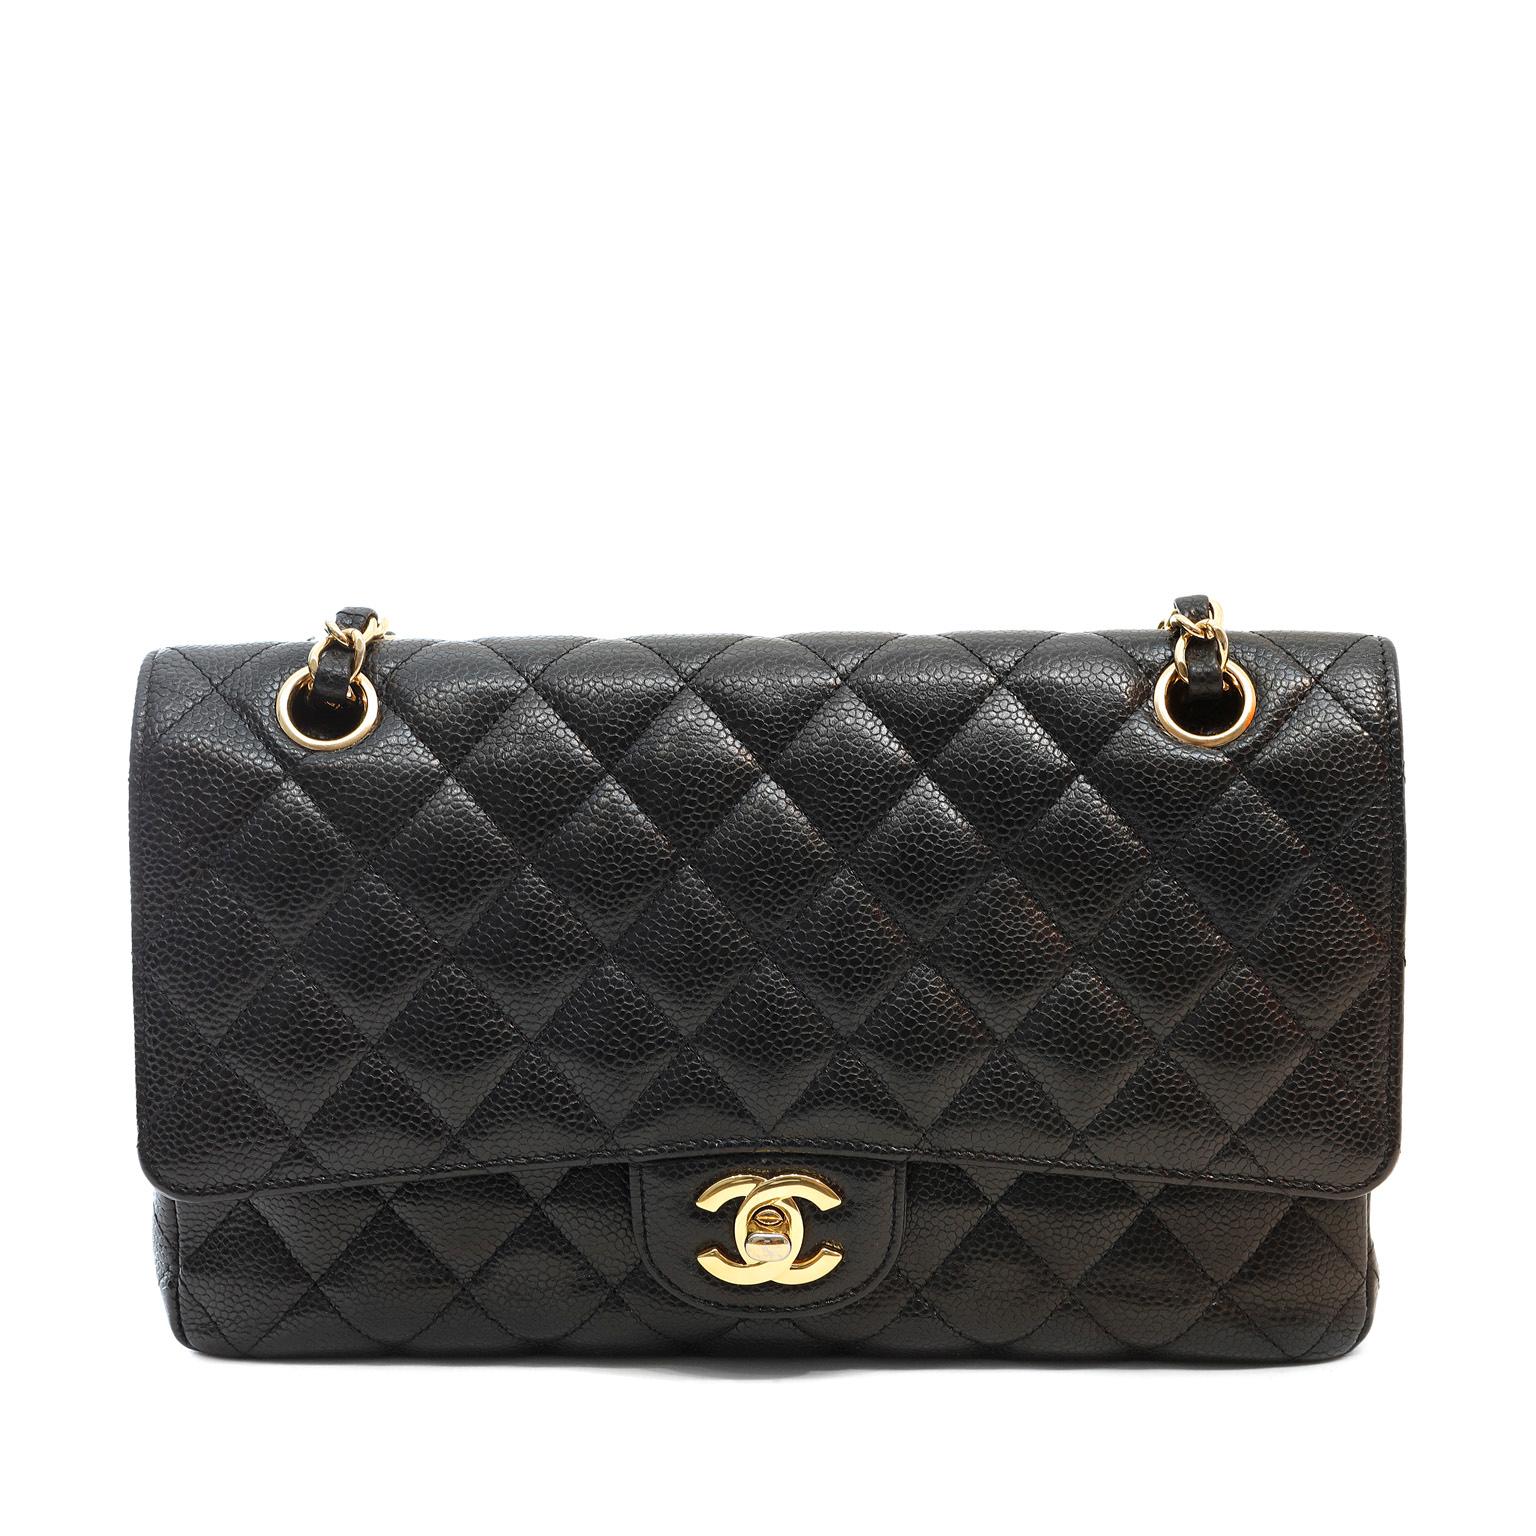 This authentic Chanel Black Caviar Leather Medium Classic Flap Bag is in pristine condition.  A key piece in any sophisticated wardrobe, the Classic Flap is one of the most sought-after Chanel styles produced.

Durable and textured black caviar